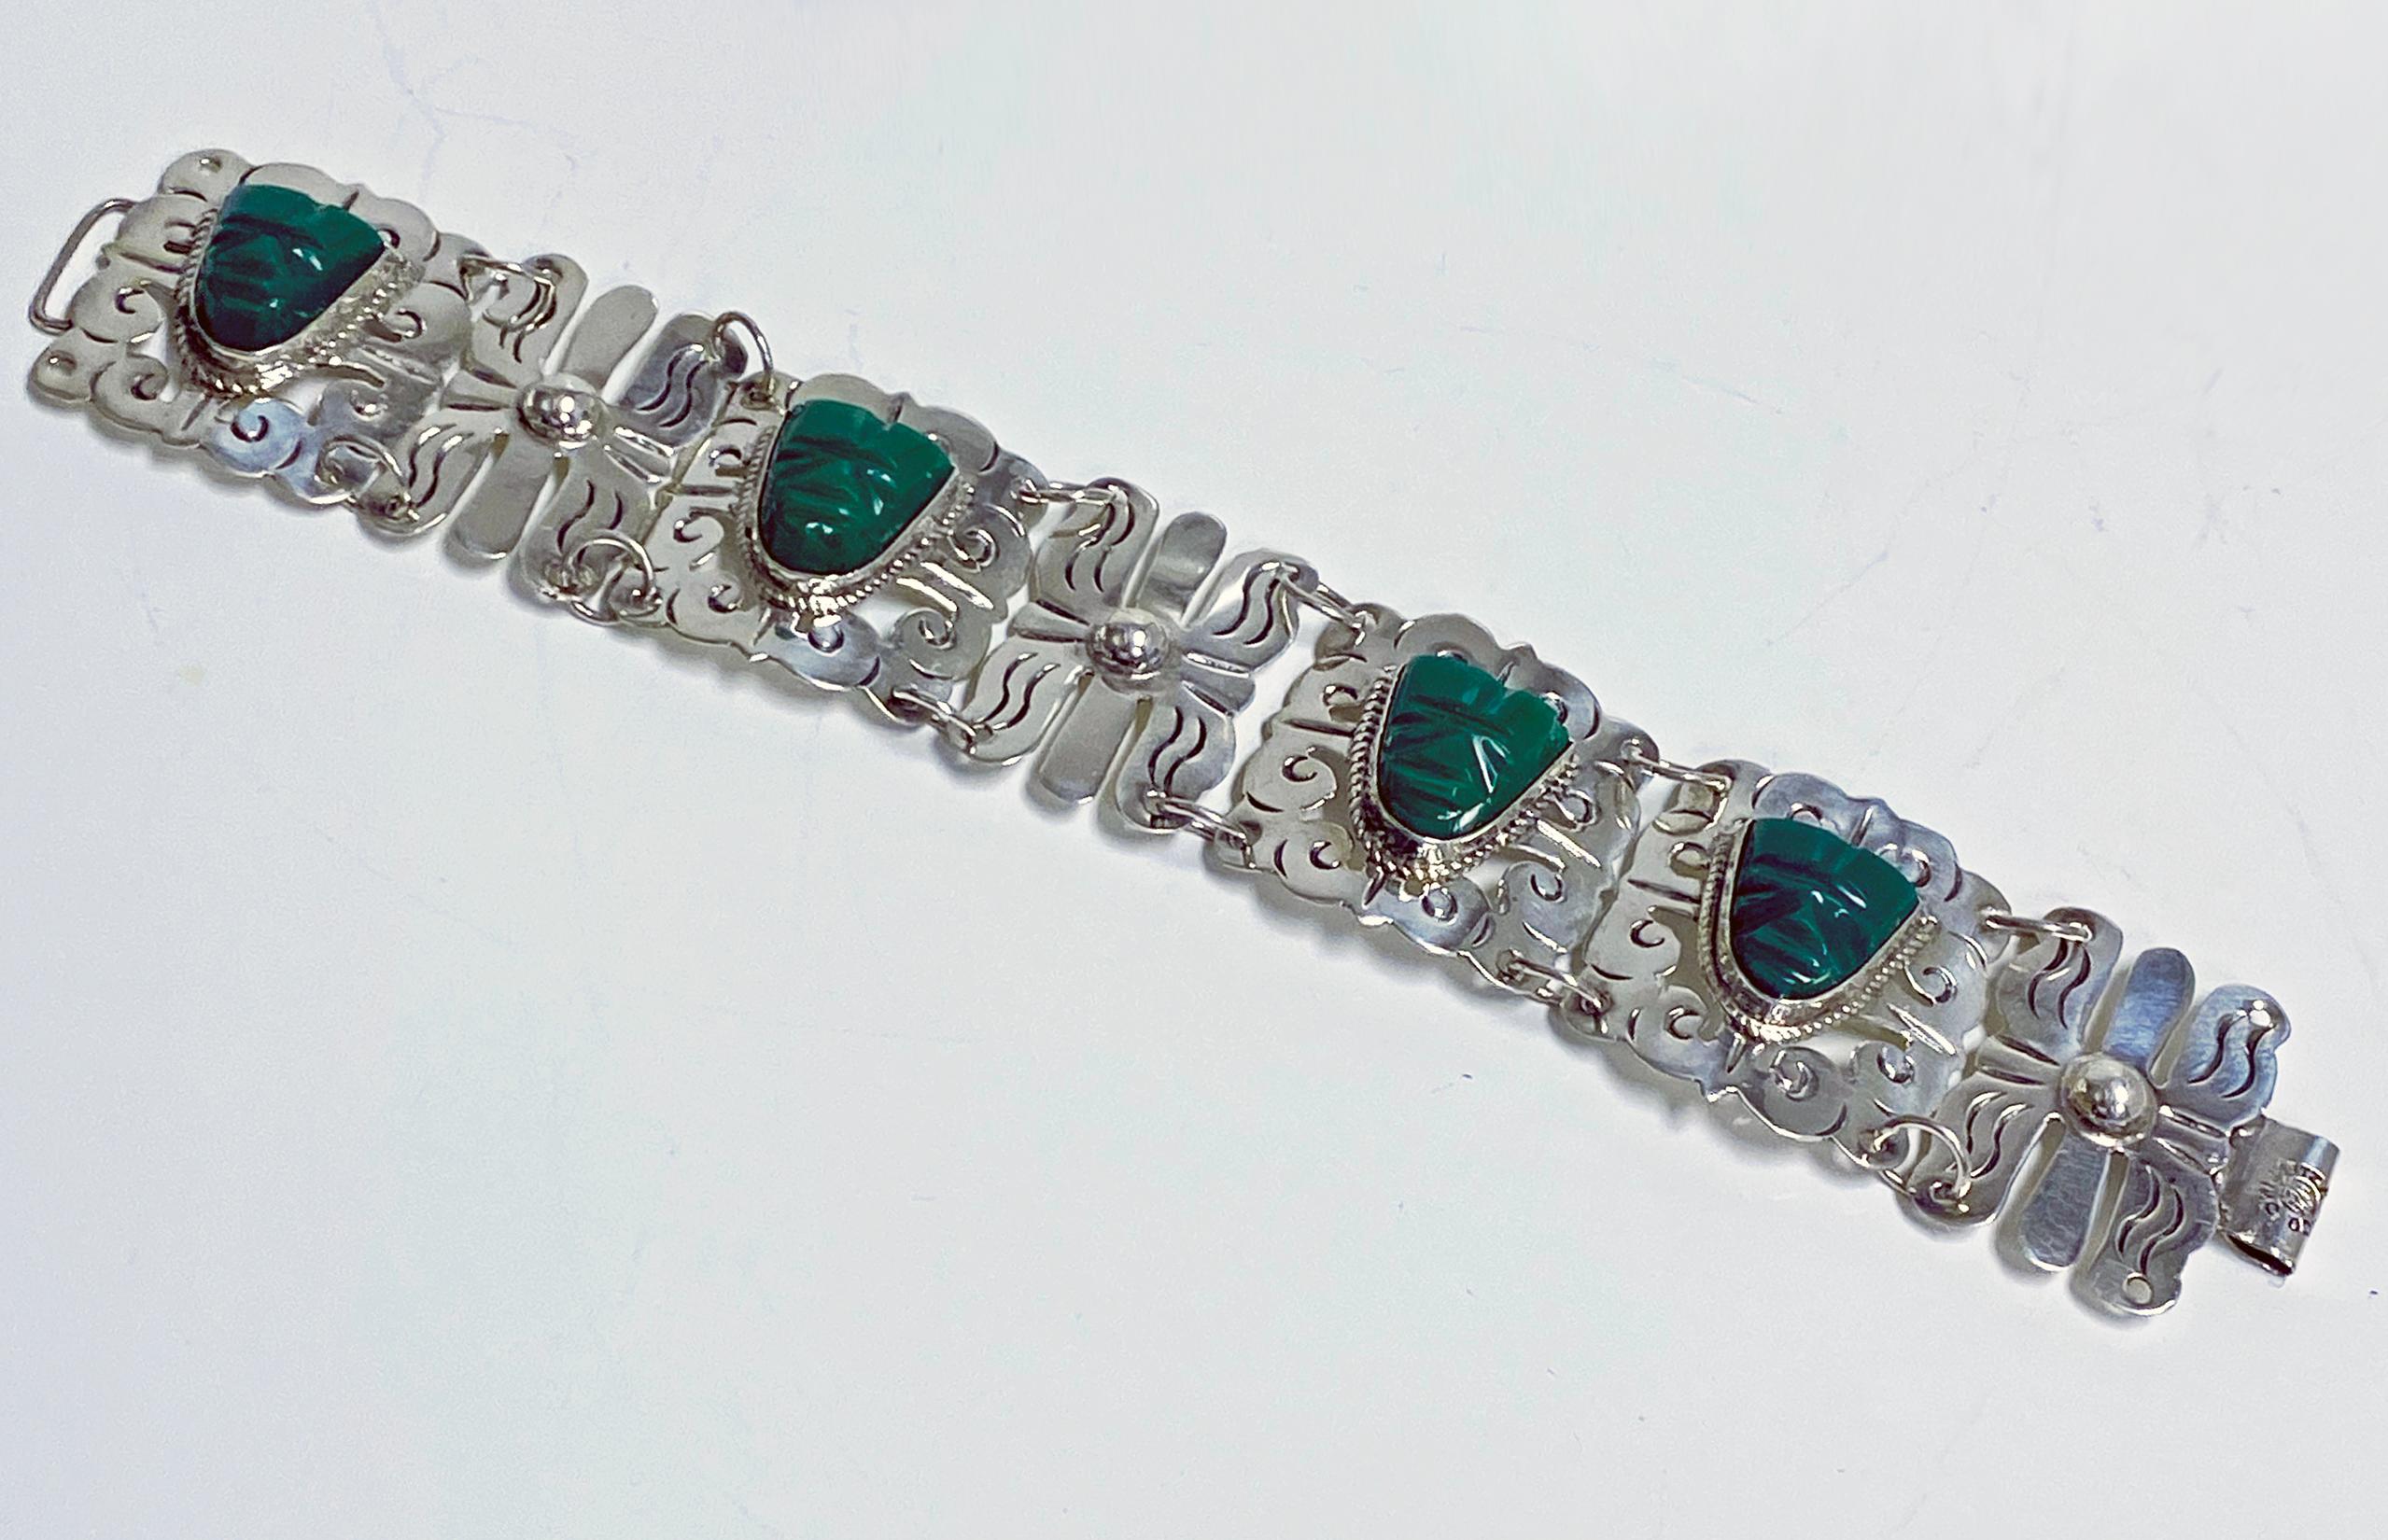 Vintage 1940's Mexican Sterling Silver Bracelet Green Onyx Tribal Aztec Masks. The bracelet with four carved green onyx face, south western style links, hook fastener conforming as clasp. Lengrth: 7 inches. Width: 1.25 inches. Item Weight: 36.19